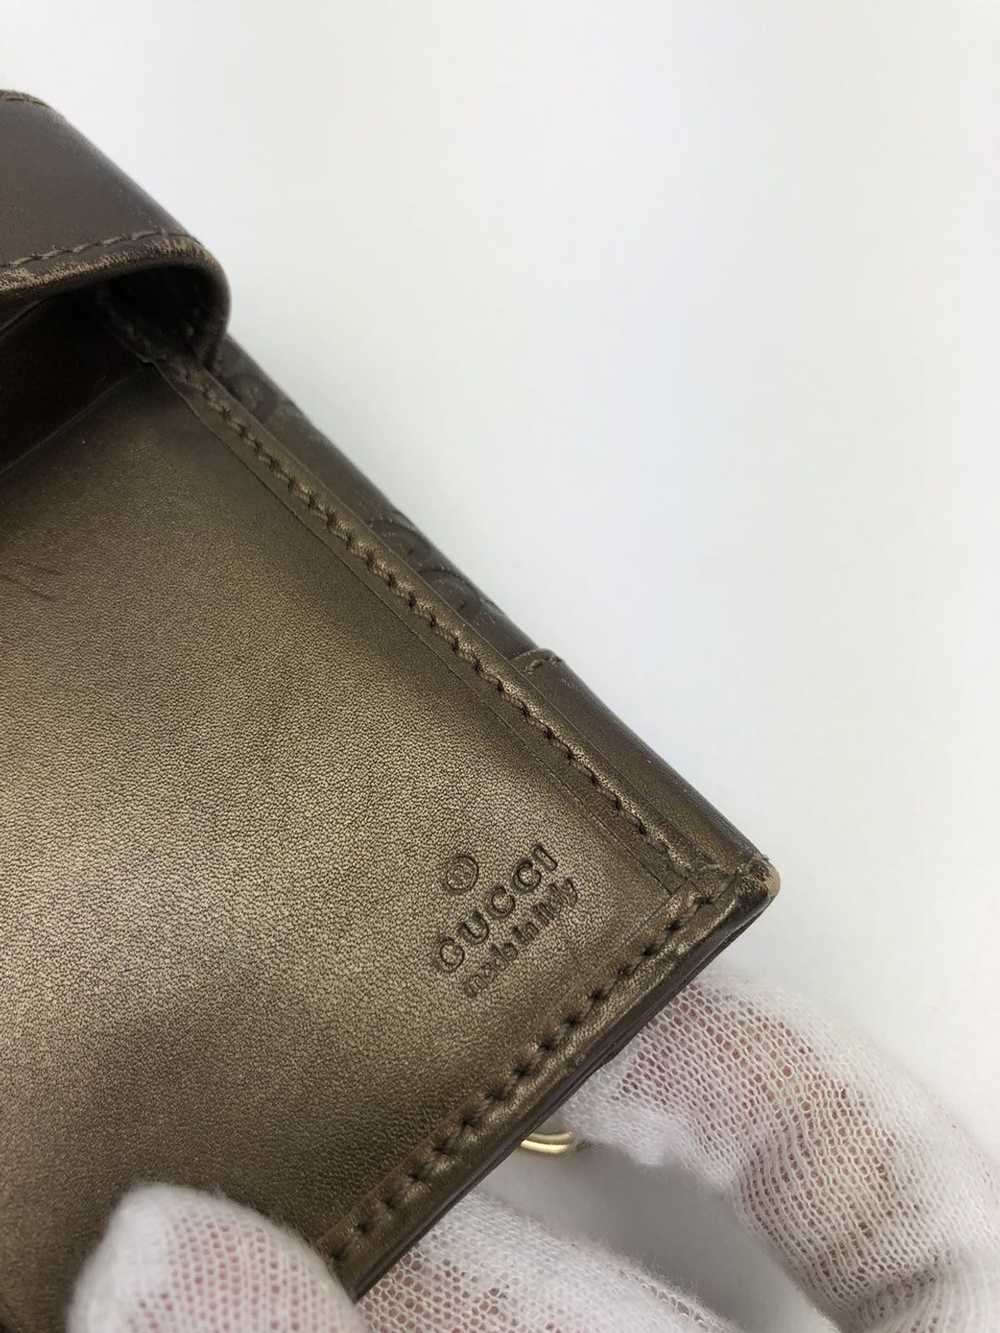 Gucci Gucci gg guccissima leather long wallet - image 5